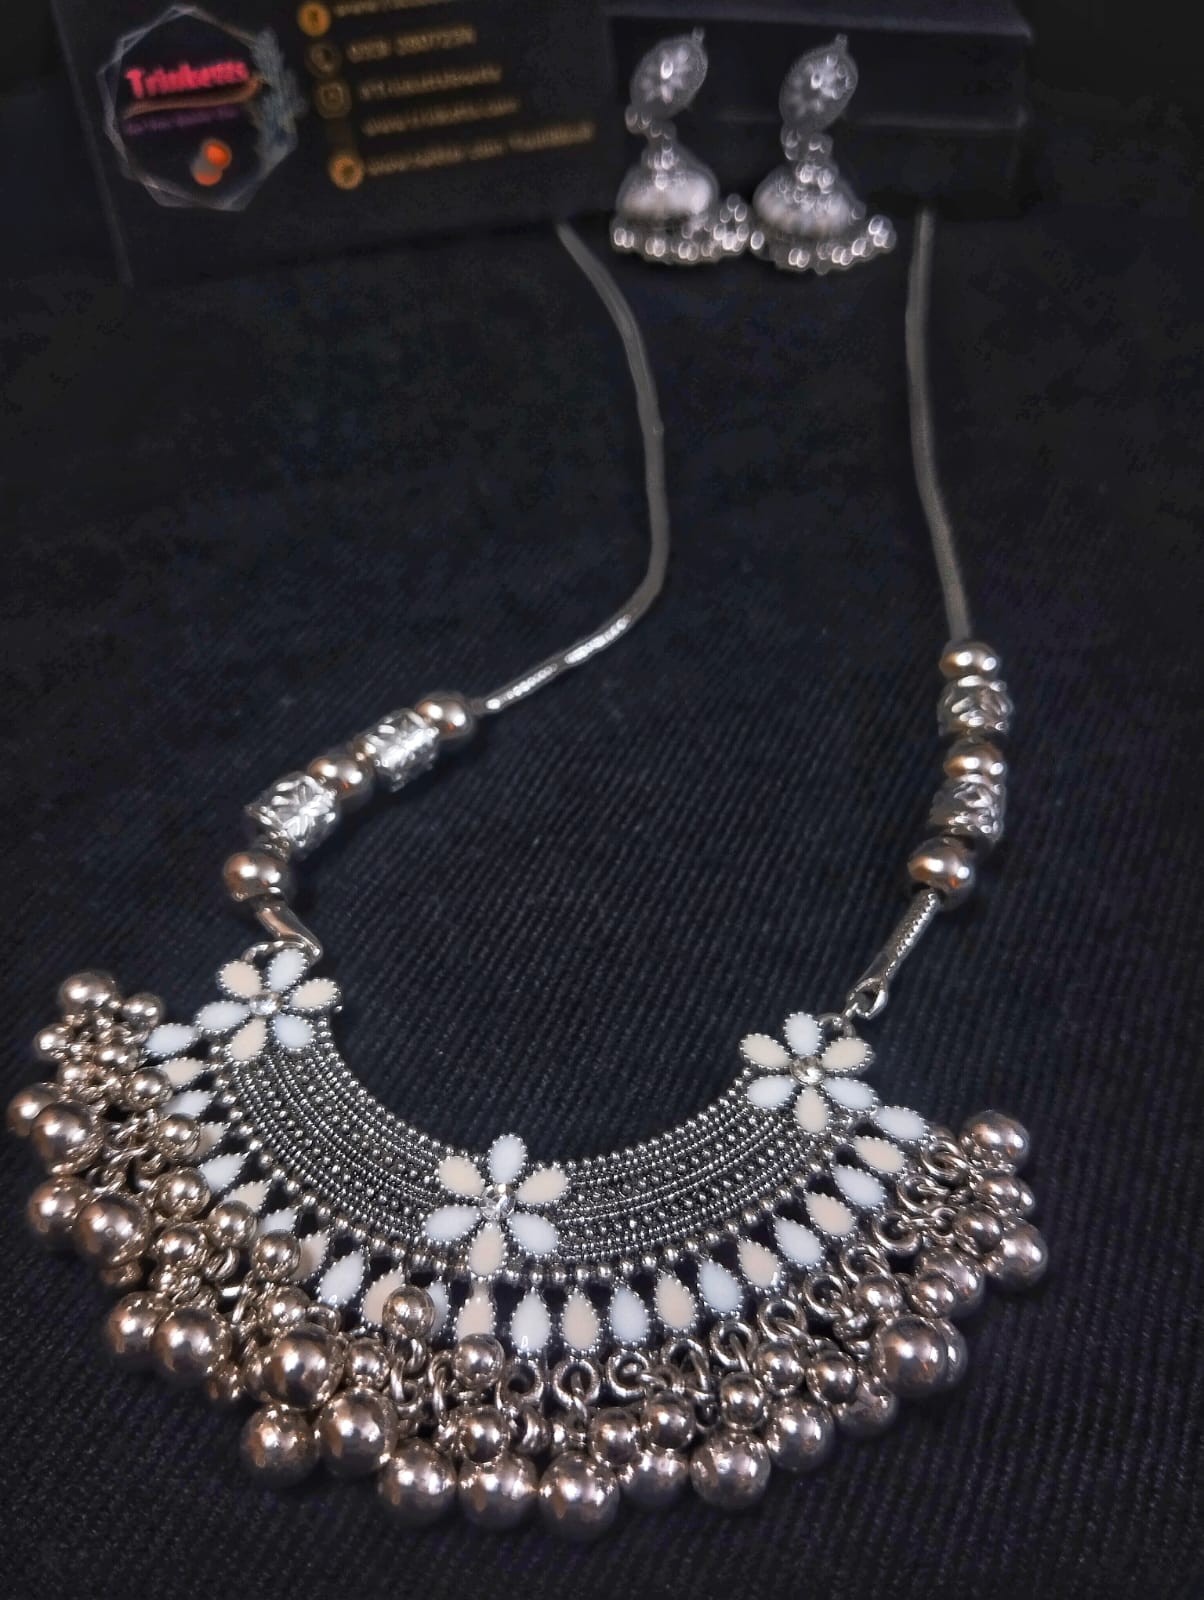 Silver Oxidized Meenakari Pendant Necklace with White and Off-White Pendant, Jhumkis, and Ghungroos